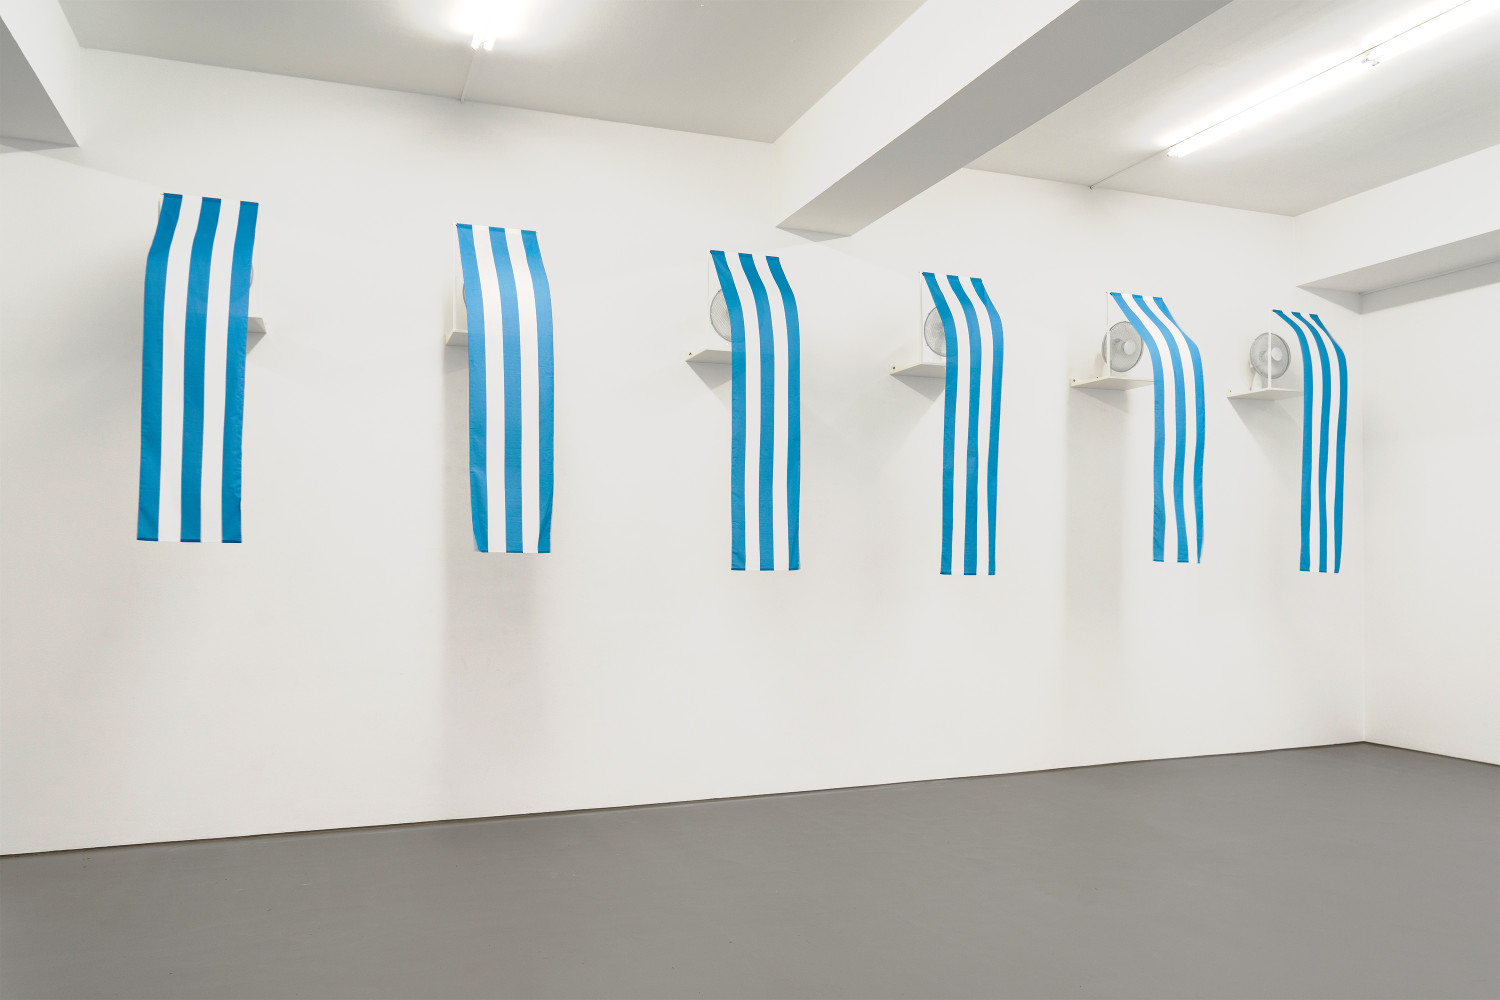 Daniel Buren, ‘Westwind - travail situé, 2010 fabric, steel, fans, clips (fabric with blue and white stripes)’, 2010